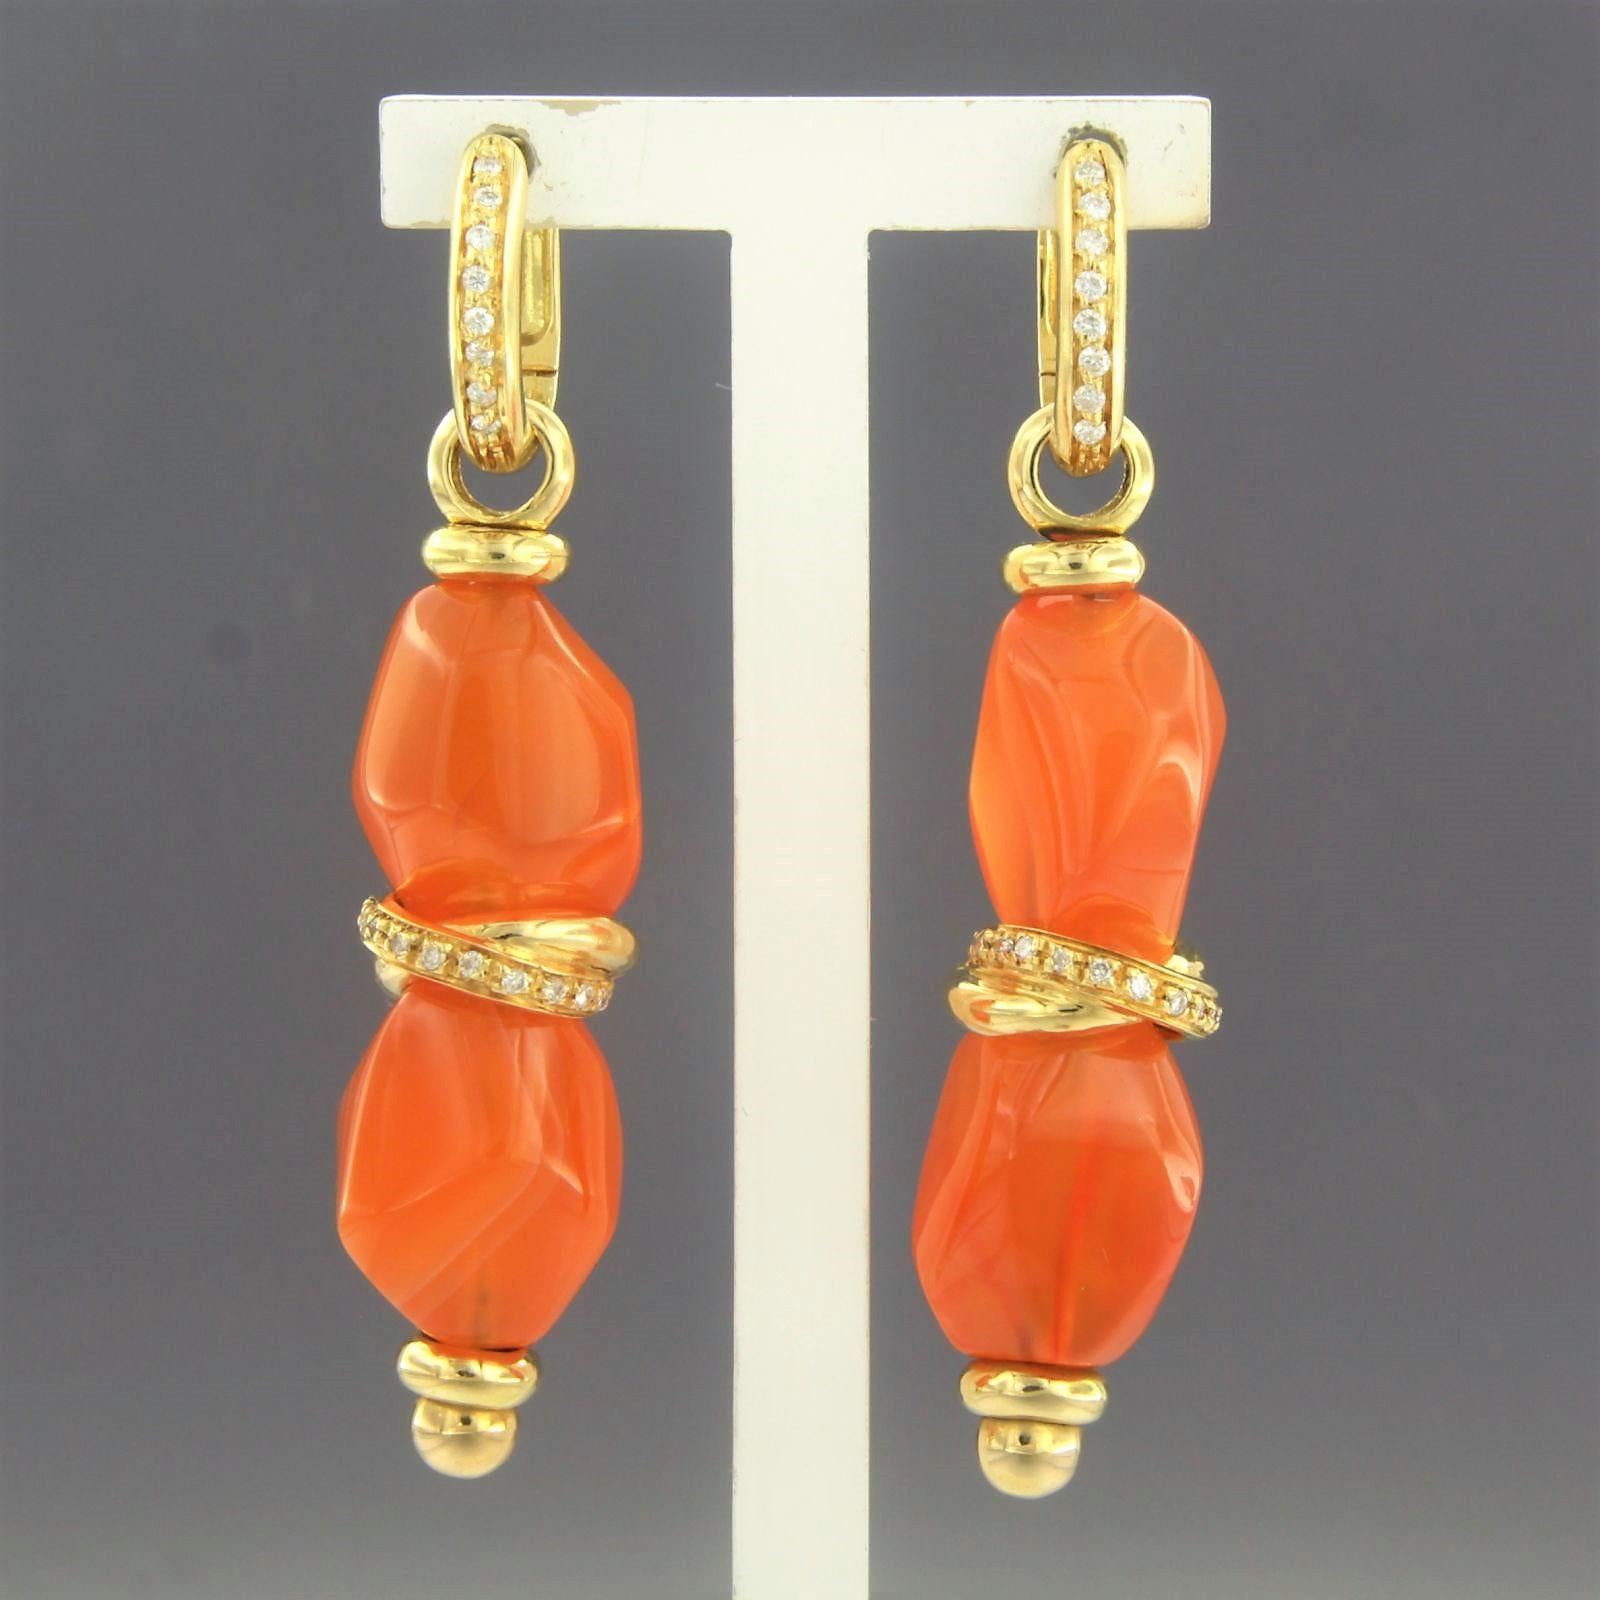 18k yellow gold earrings set with carnelian and brilliant cut diamonds, approximately 0.25ct in total - F/G - VS/SI

detailed description:

The size of the ear studs is 3.2 cm by 1.1 cm wide

weight 14.4 grams

Occupied with

- 4 x 1.3 cm x 1.0 cm